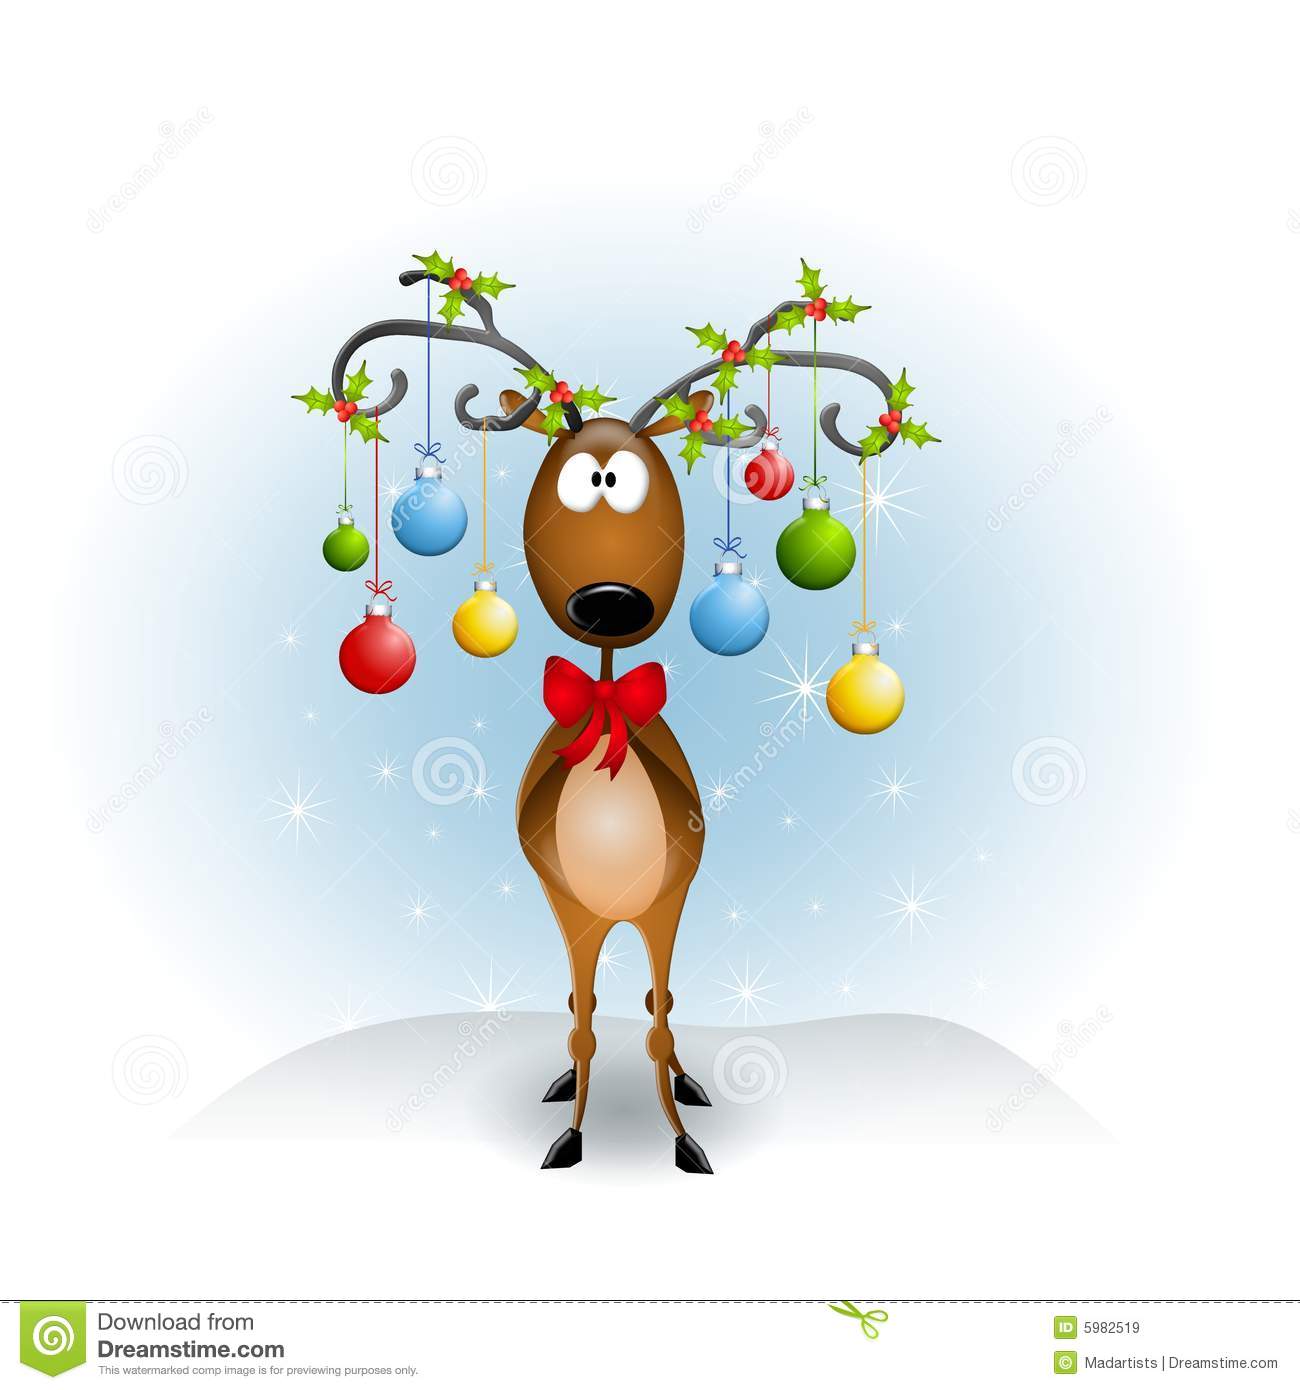 Clip Art Illustration Featuring A Reindeer With Antlers Decorated